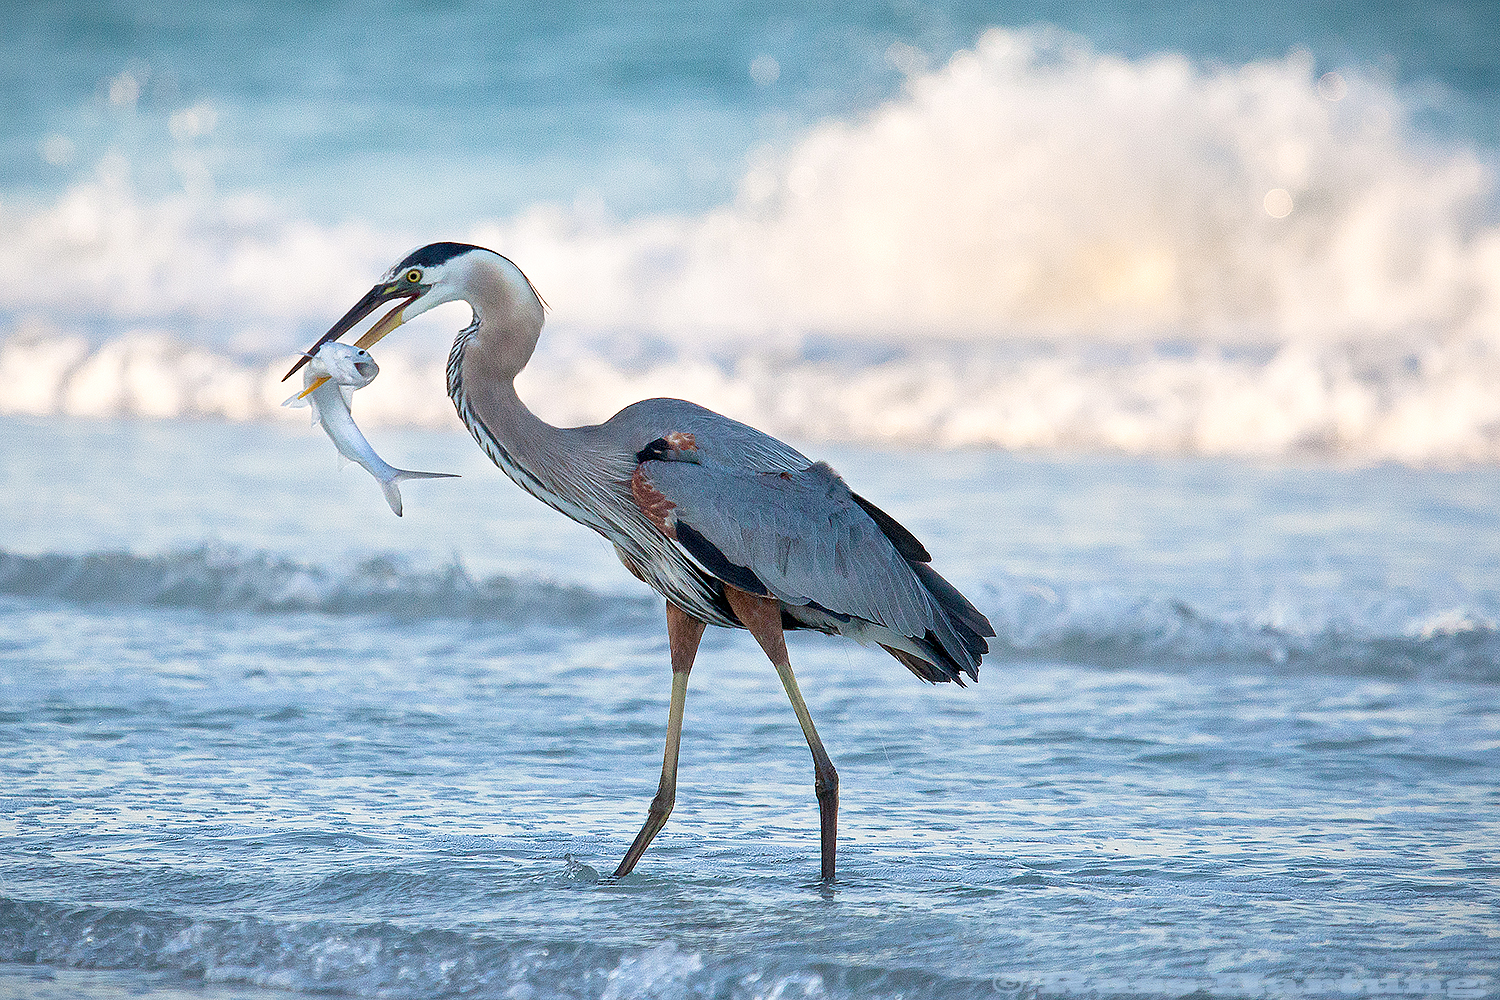 Great Blue Heron with a fish that's not too happy about being his breakfast. Anna Maria Island, Florida. 